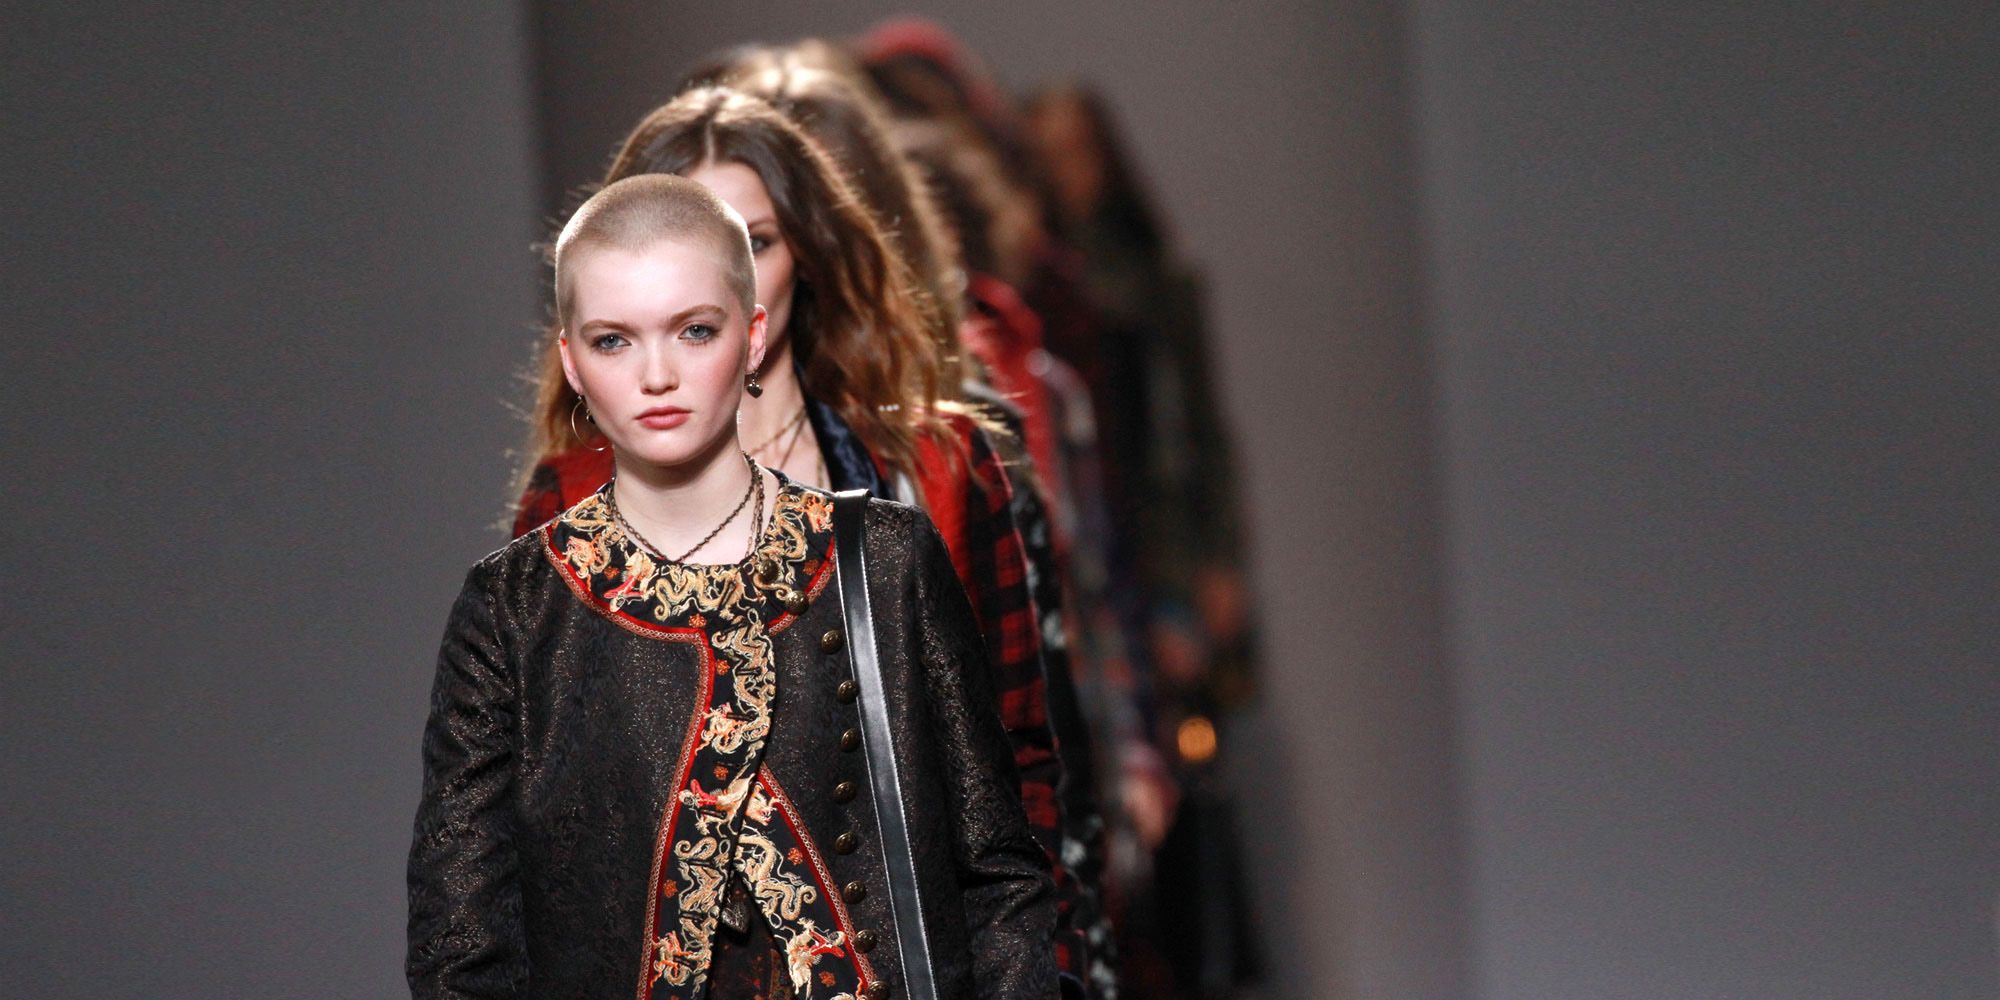 pijpleiding aanval samenvoegen All the Looks From the Etro Fall 2016 Ready-to-Wear Show